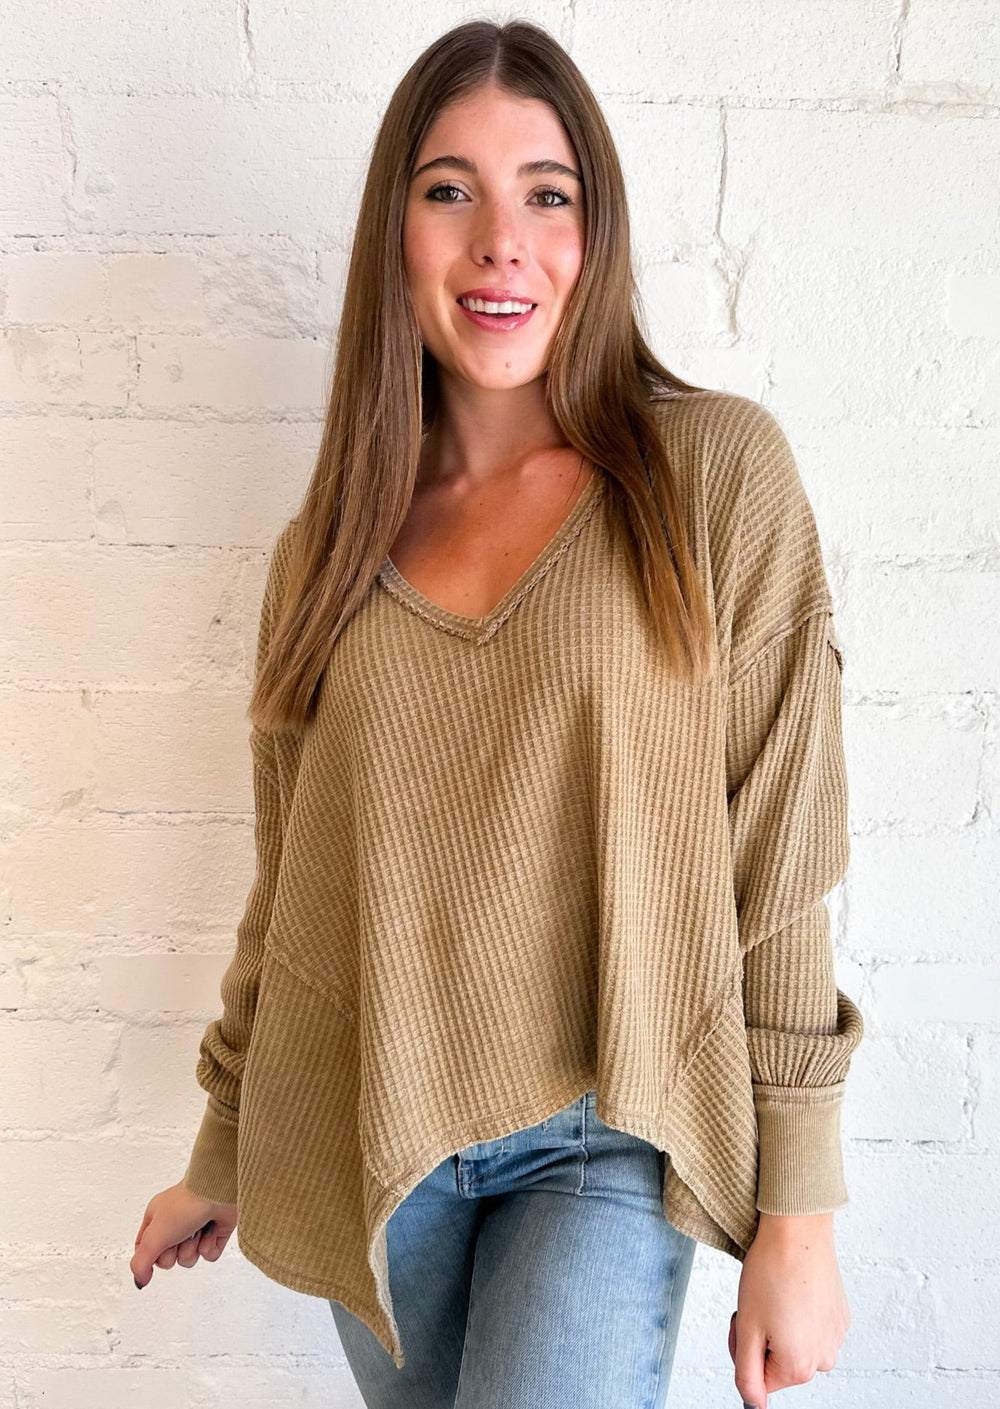 Coraline Thermal Top, Tops, Adeline, Adeline, dallas boutique, dallas texas, texas boutique, women's boutique dallas, adeline boutique, dallas boutique, trendy boutique, affordable boutique